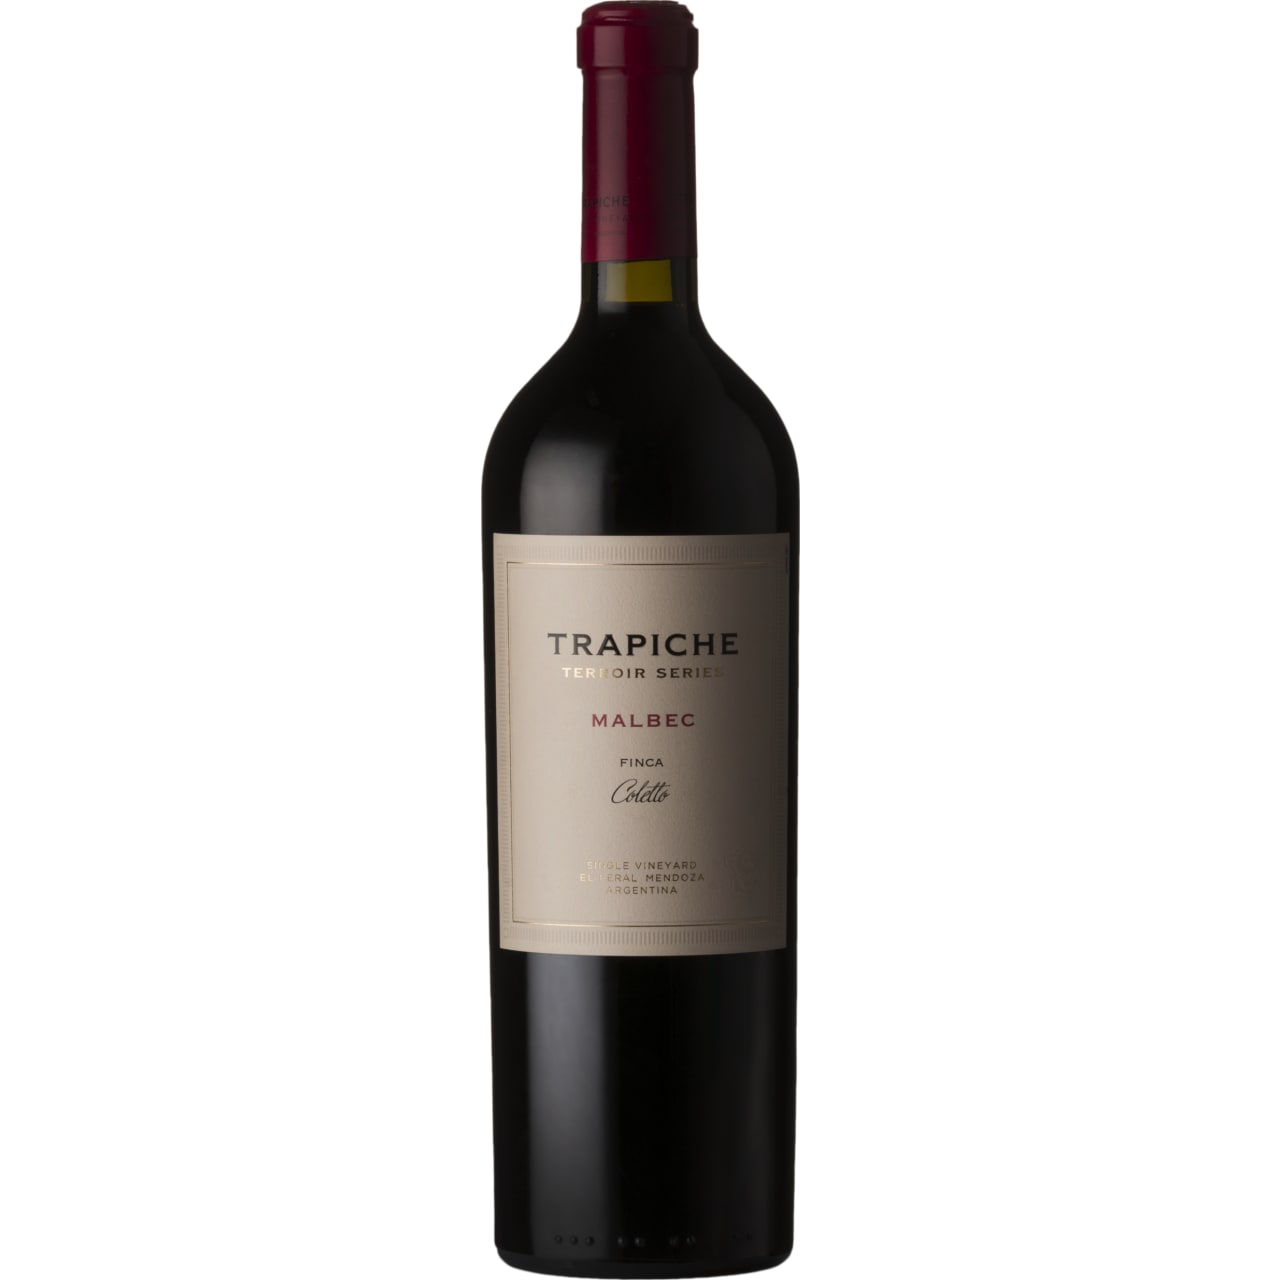 Malbec of deep and intense red-violet color, with aromas of red fruit, plums, black cherries and forest berries such as blackberries and blueberries. Fresh and full as it enters the mouth, with sweet, juicy and ample tannins and a very elegant finish.